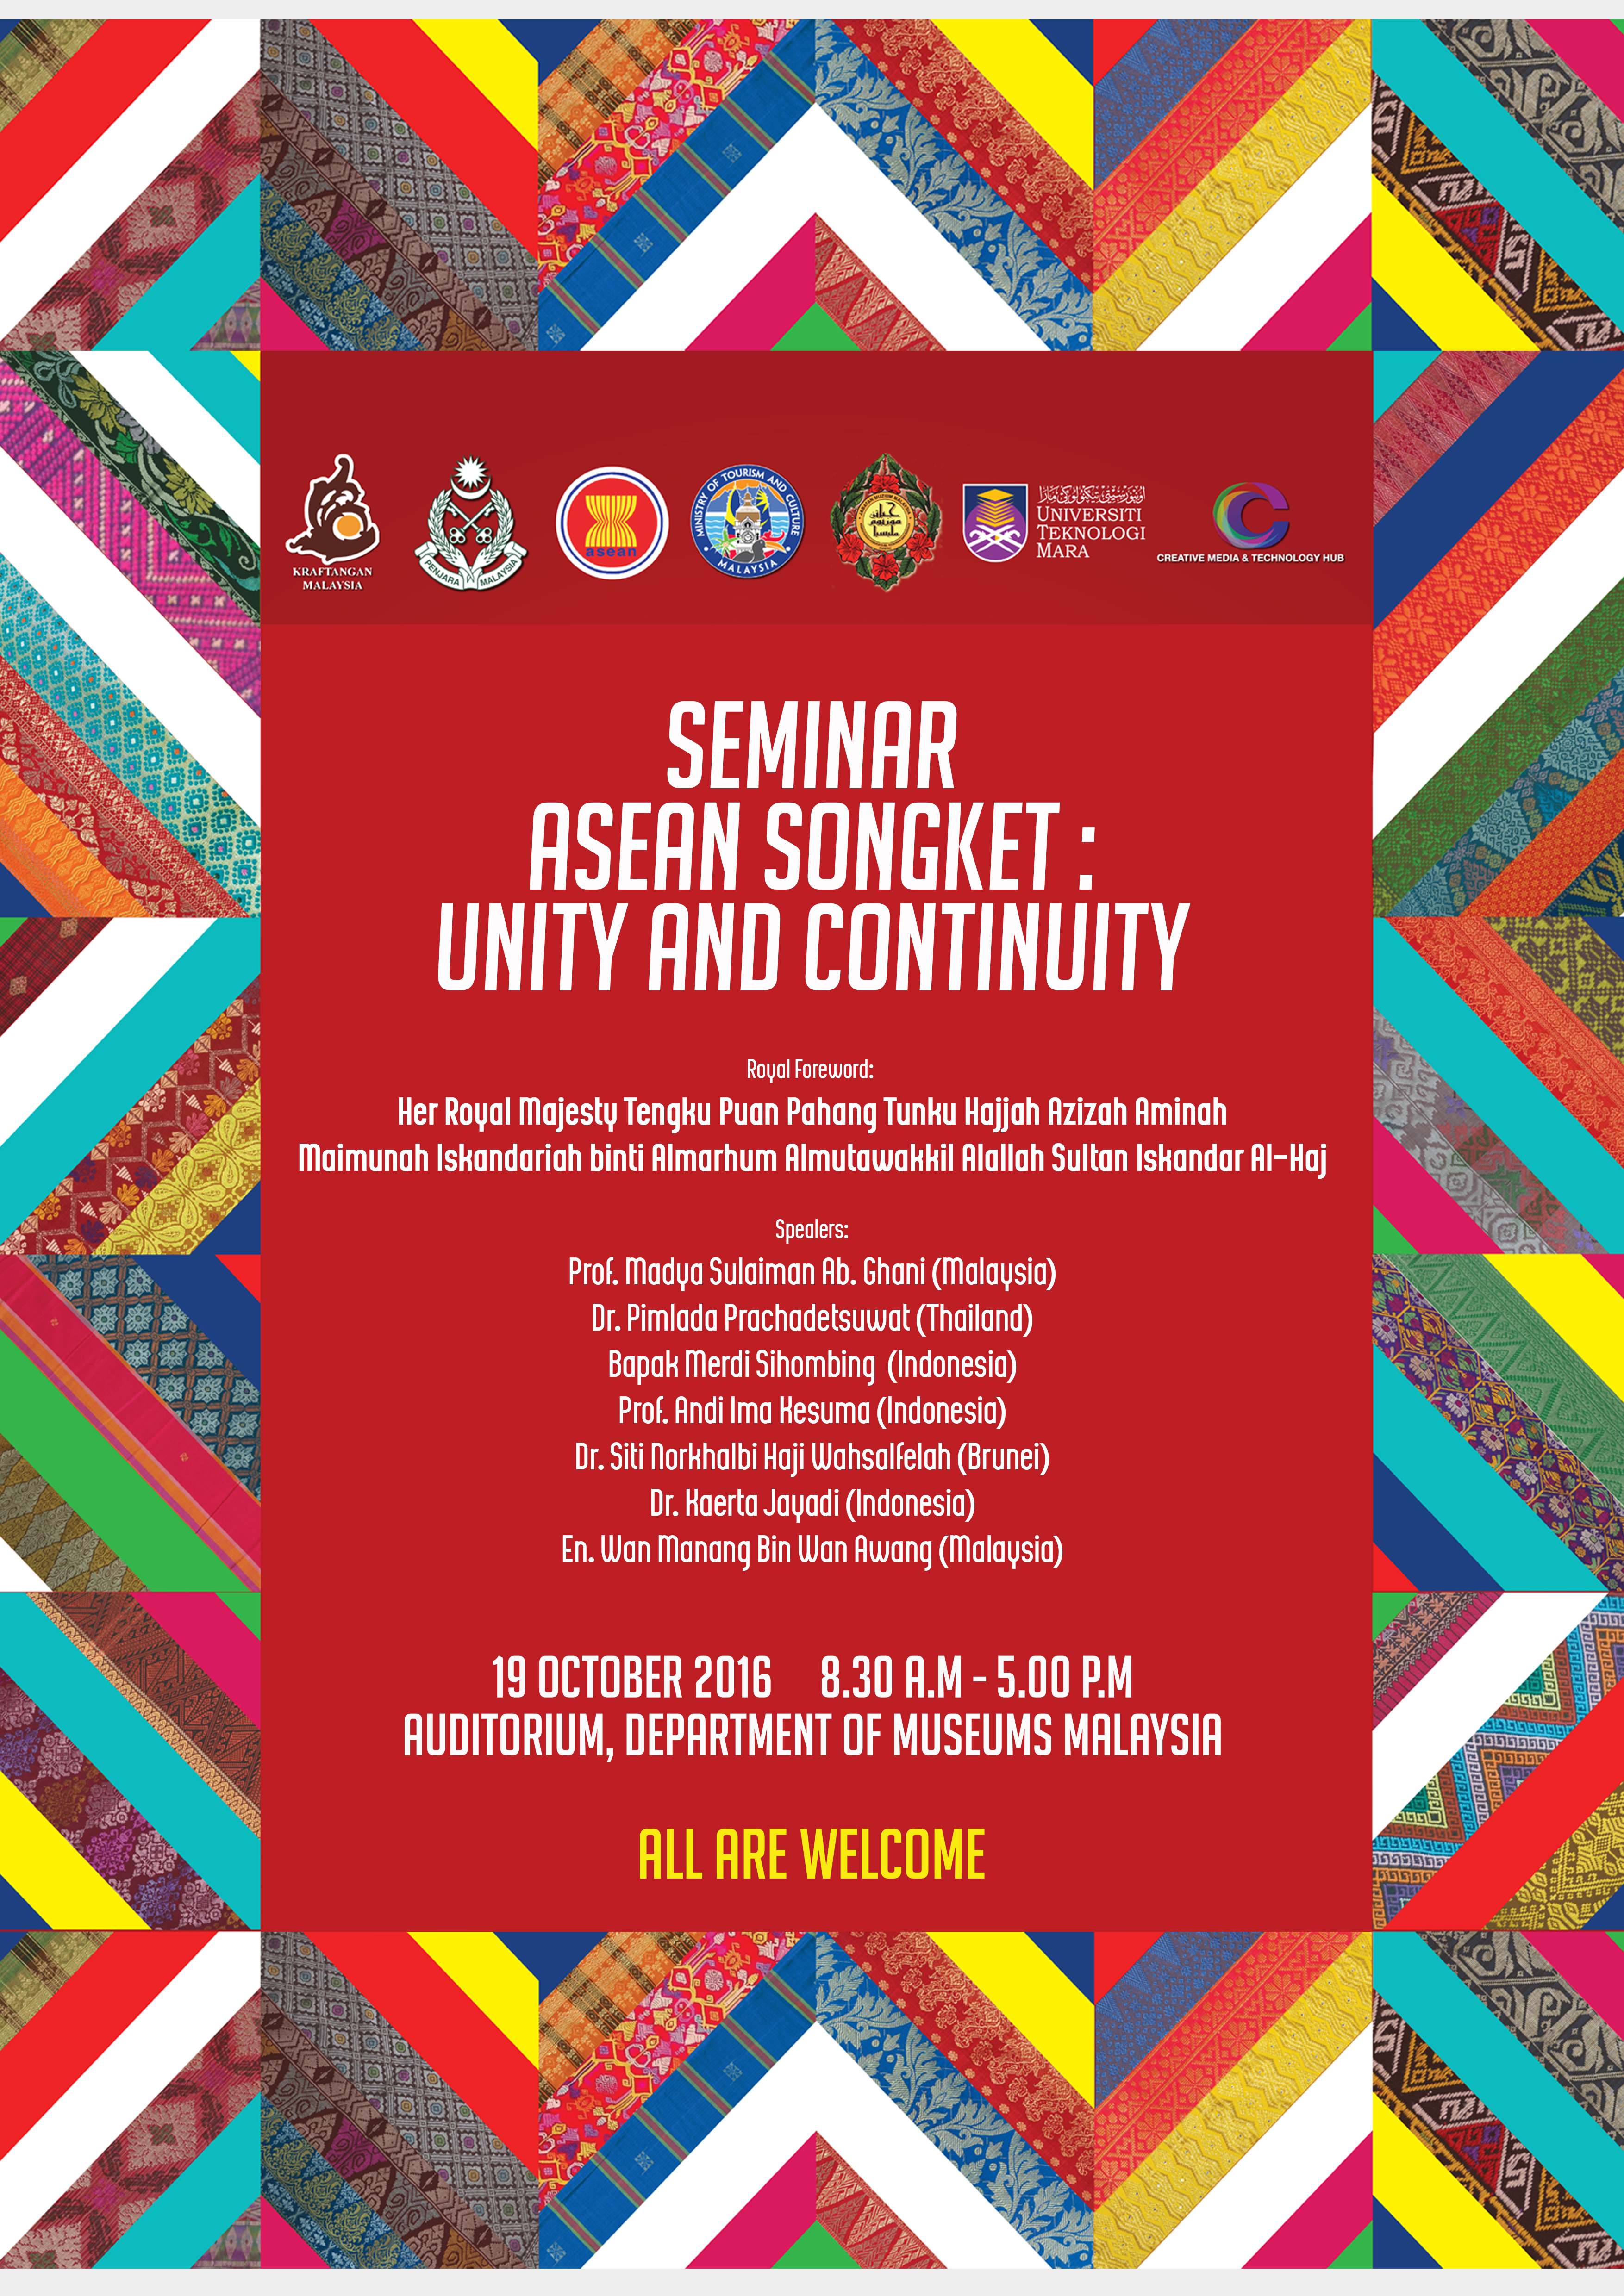 ASEAN Songket: Unity And Continuityposter